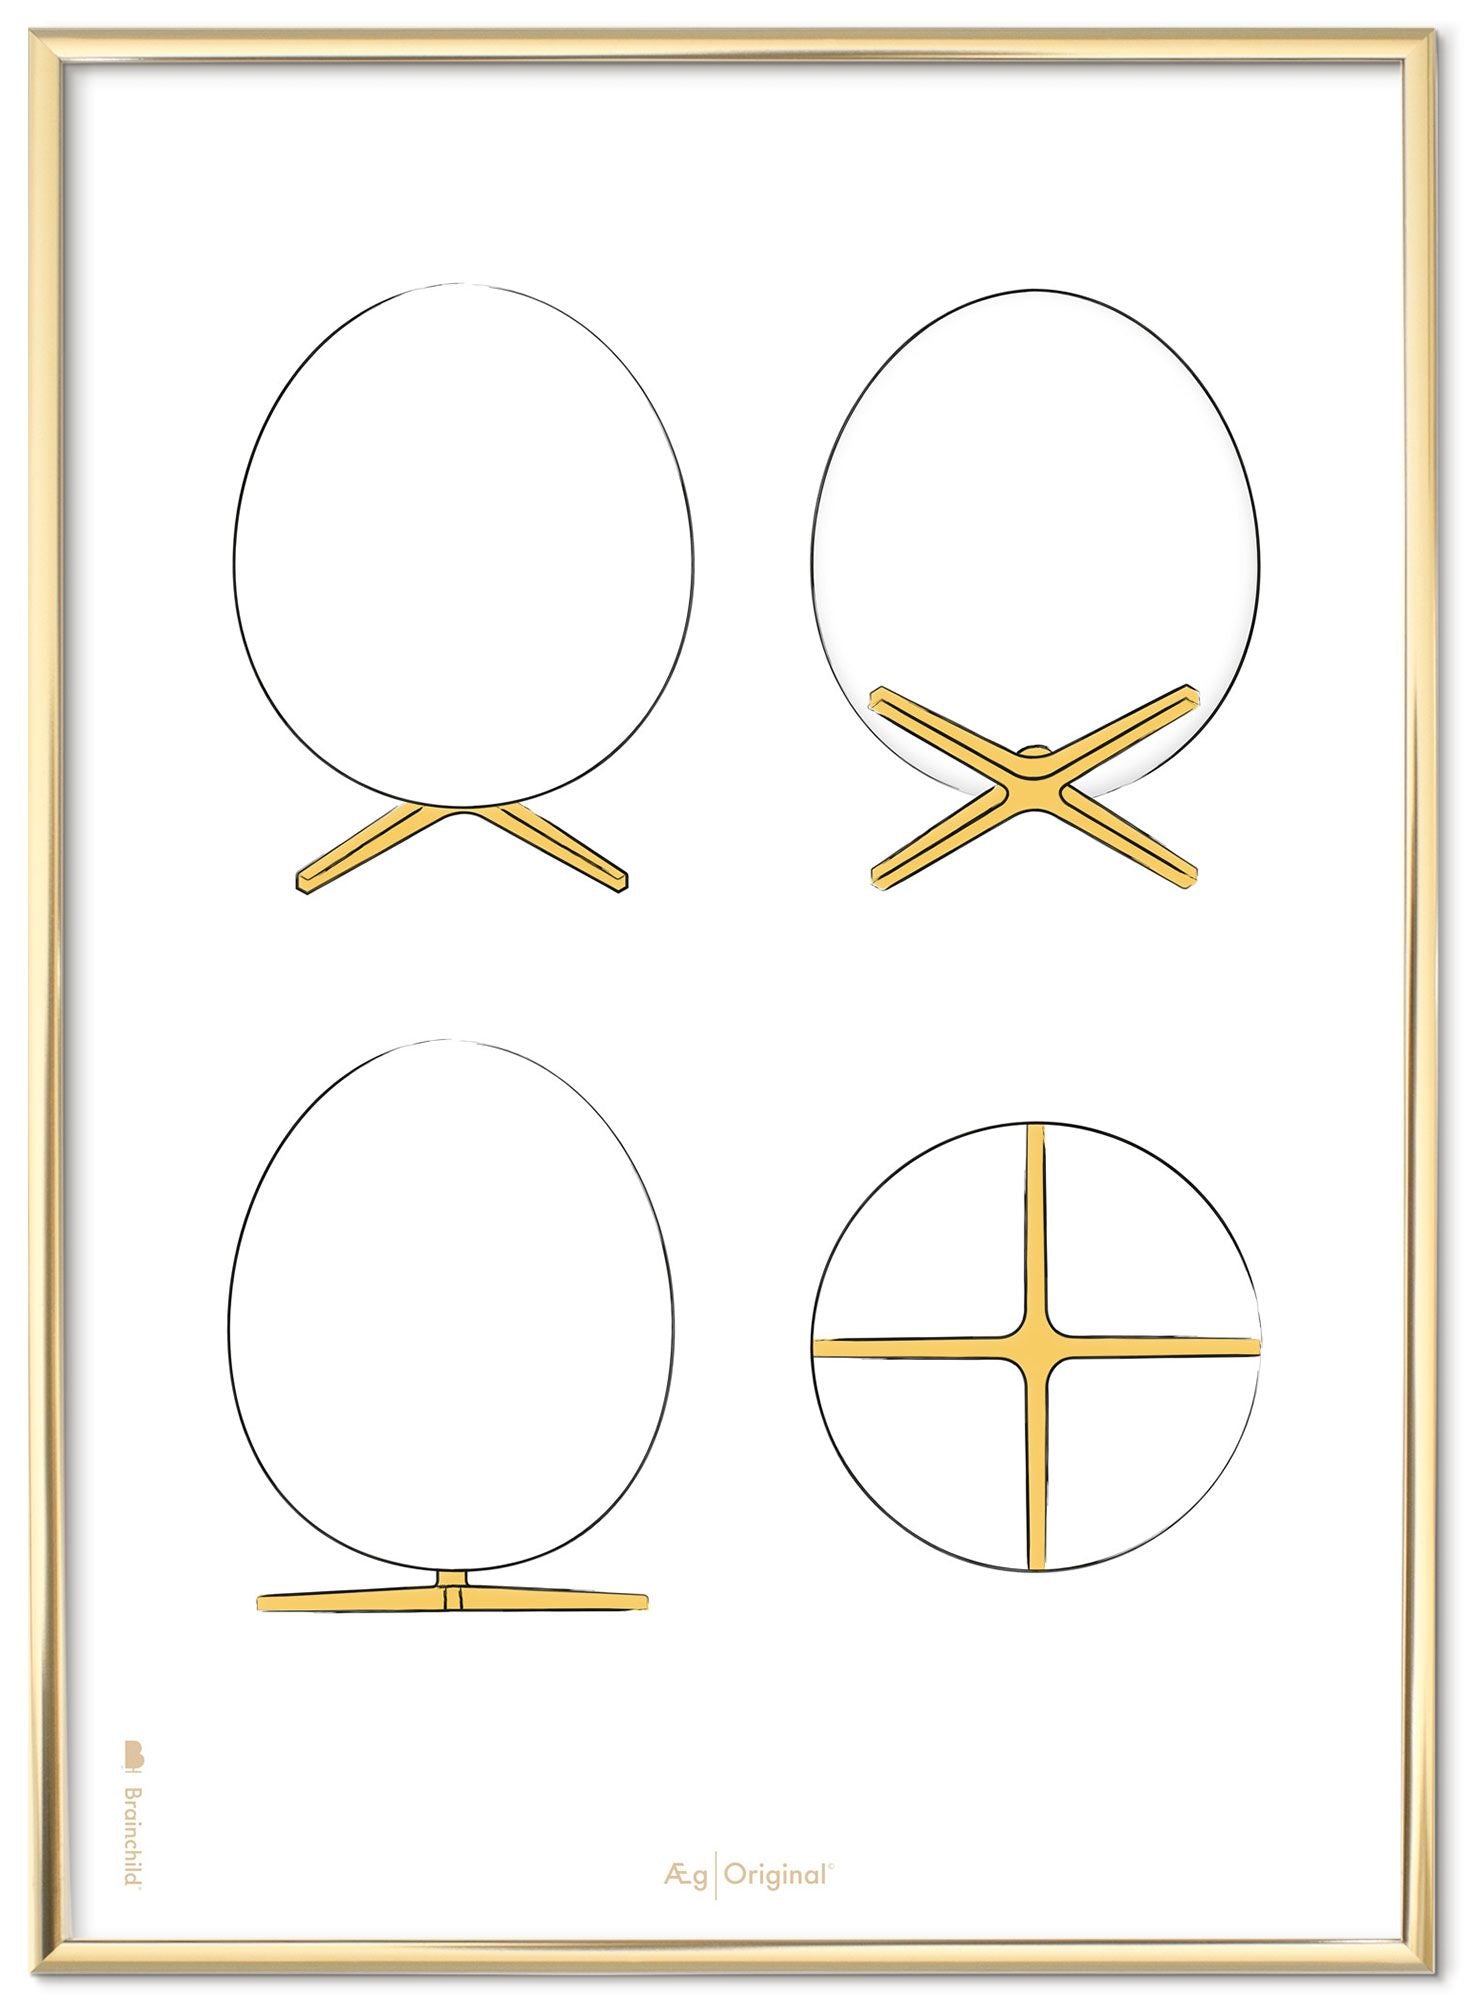 Brainchild The Egg Design Sketches Poster Frame Made Of Brass Colored Metal 50x70 Cm, White Background